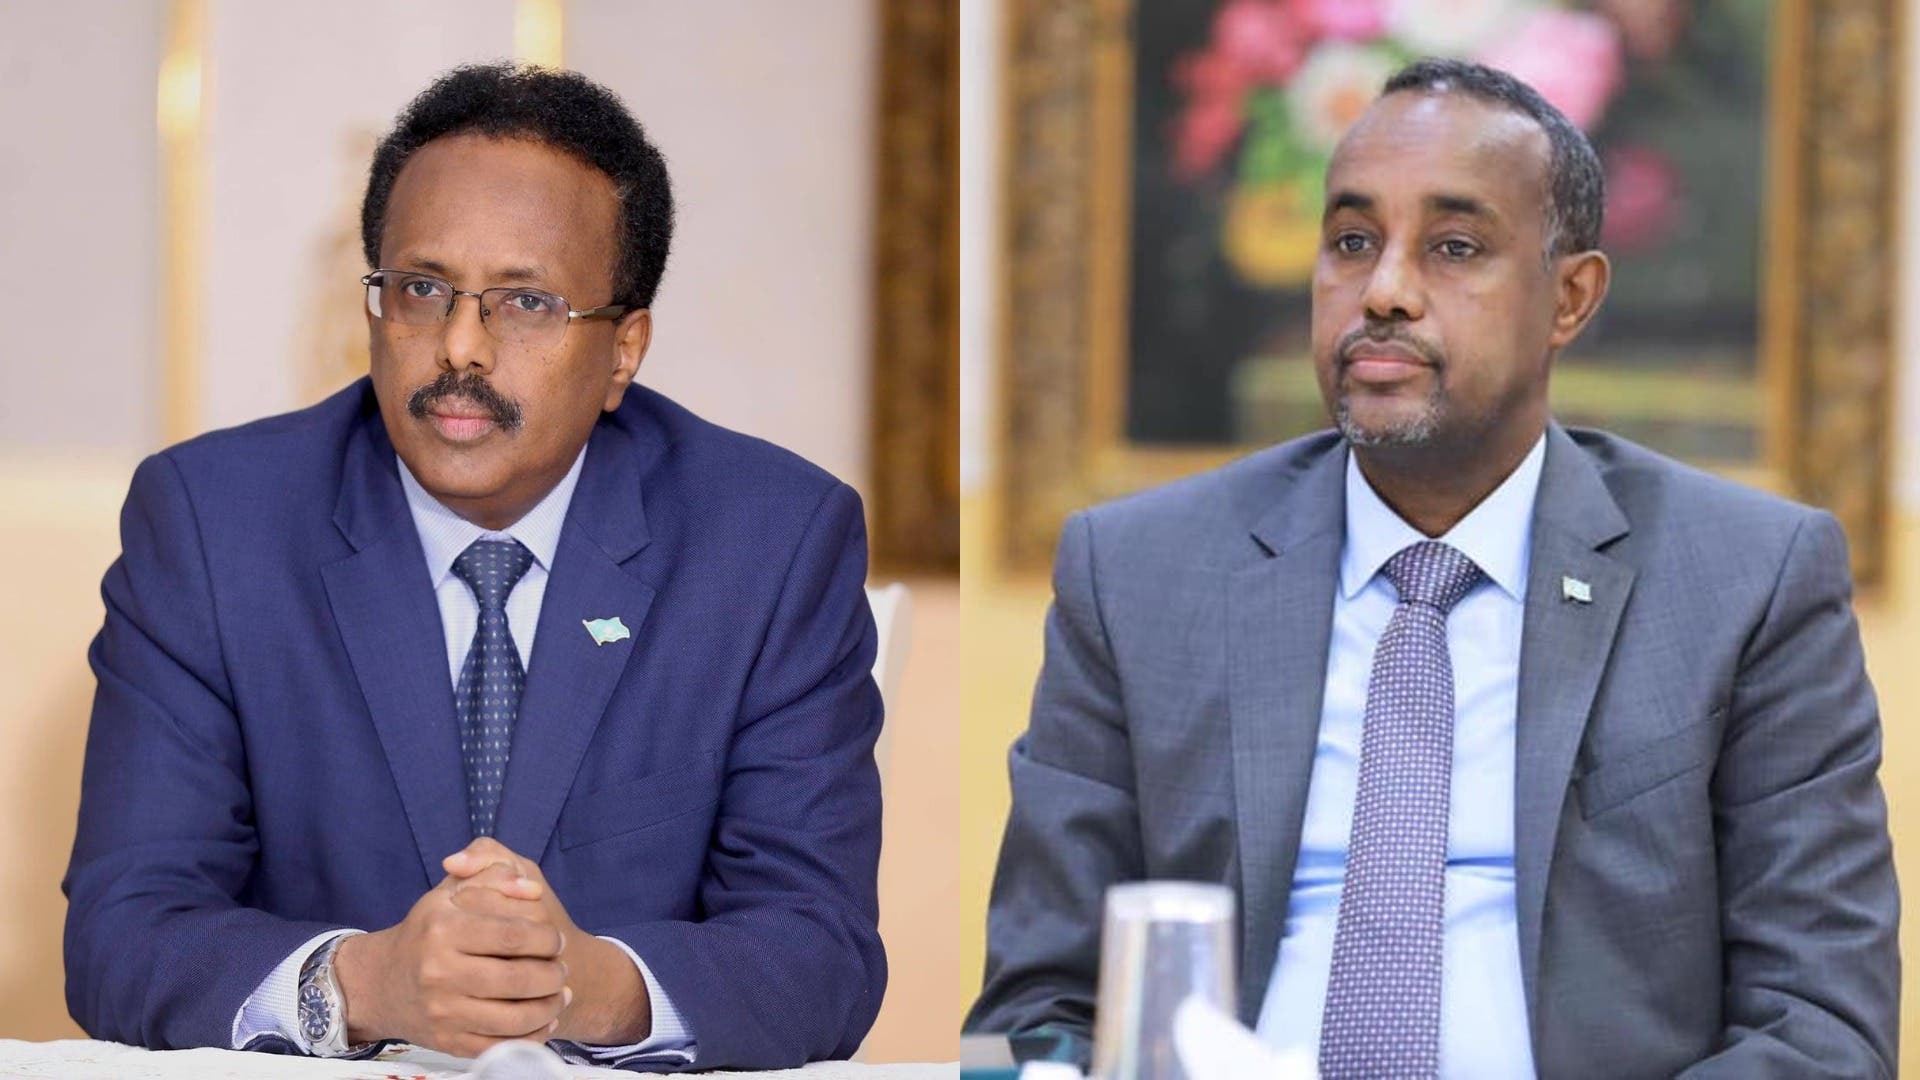 Somalia President, PM bicker in public over ‘right course’ of elections